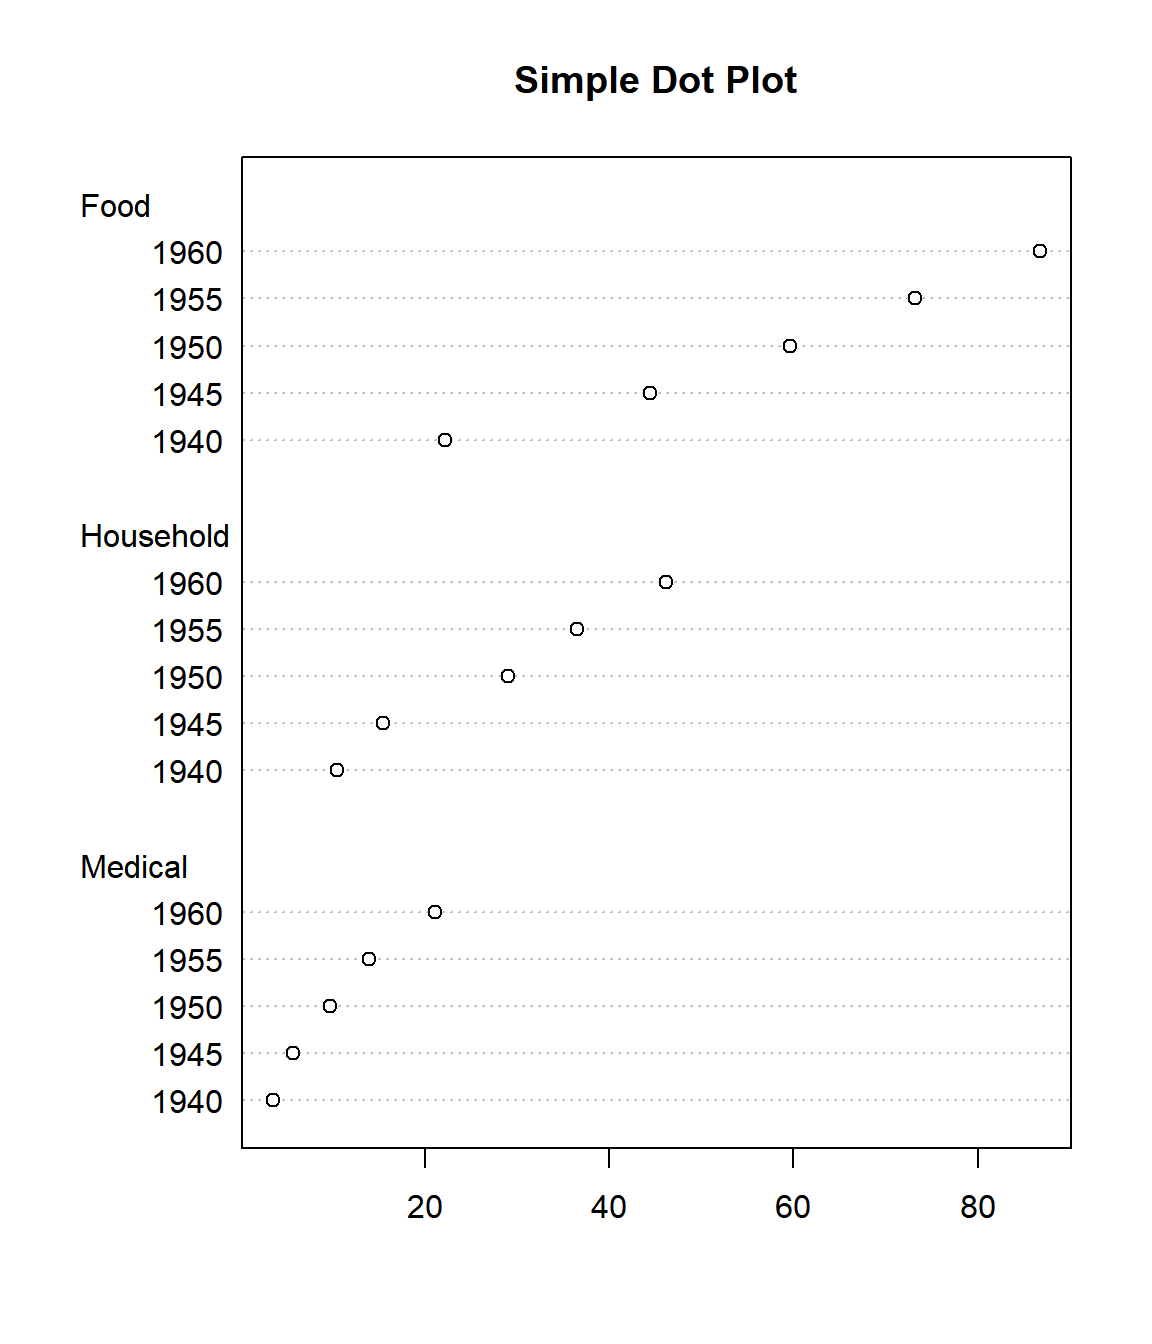 Example 1: Simple Dot Plot in R